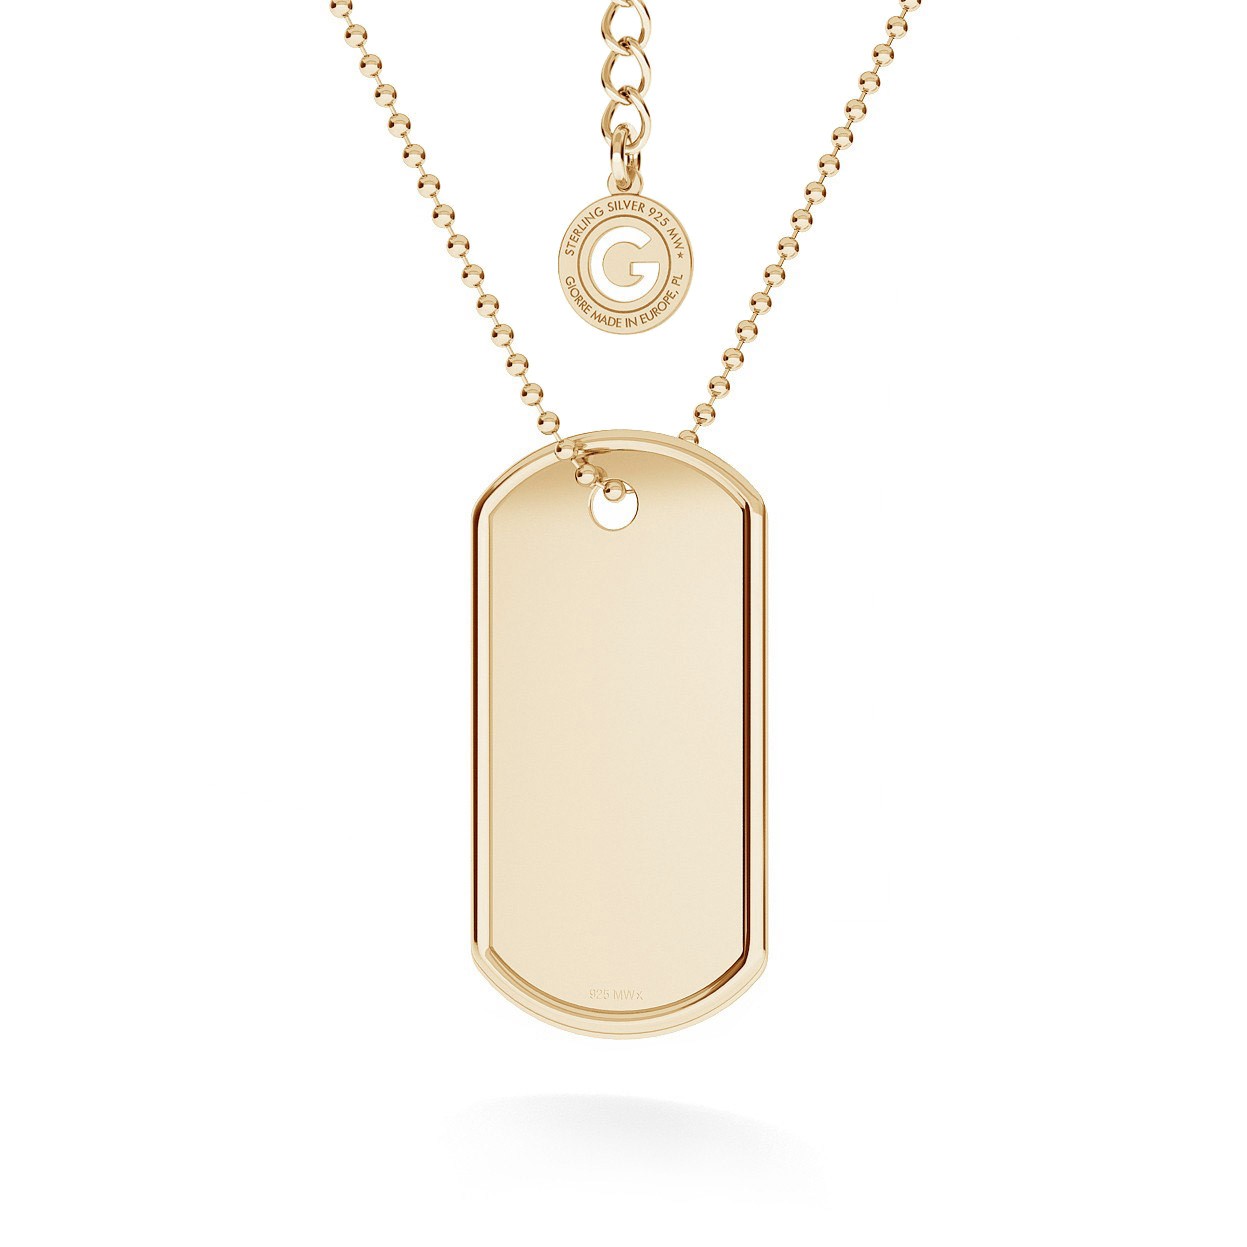 Dog tag with engrave and chain silver 925, rhodium or gold plated